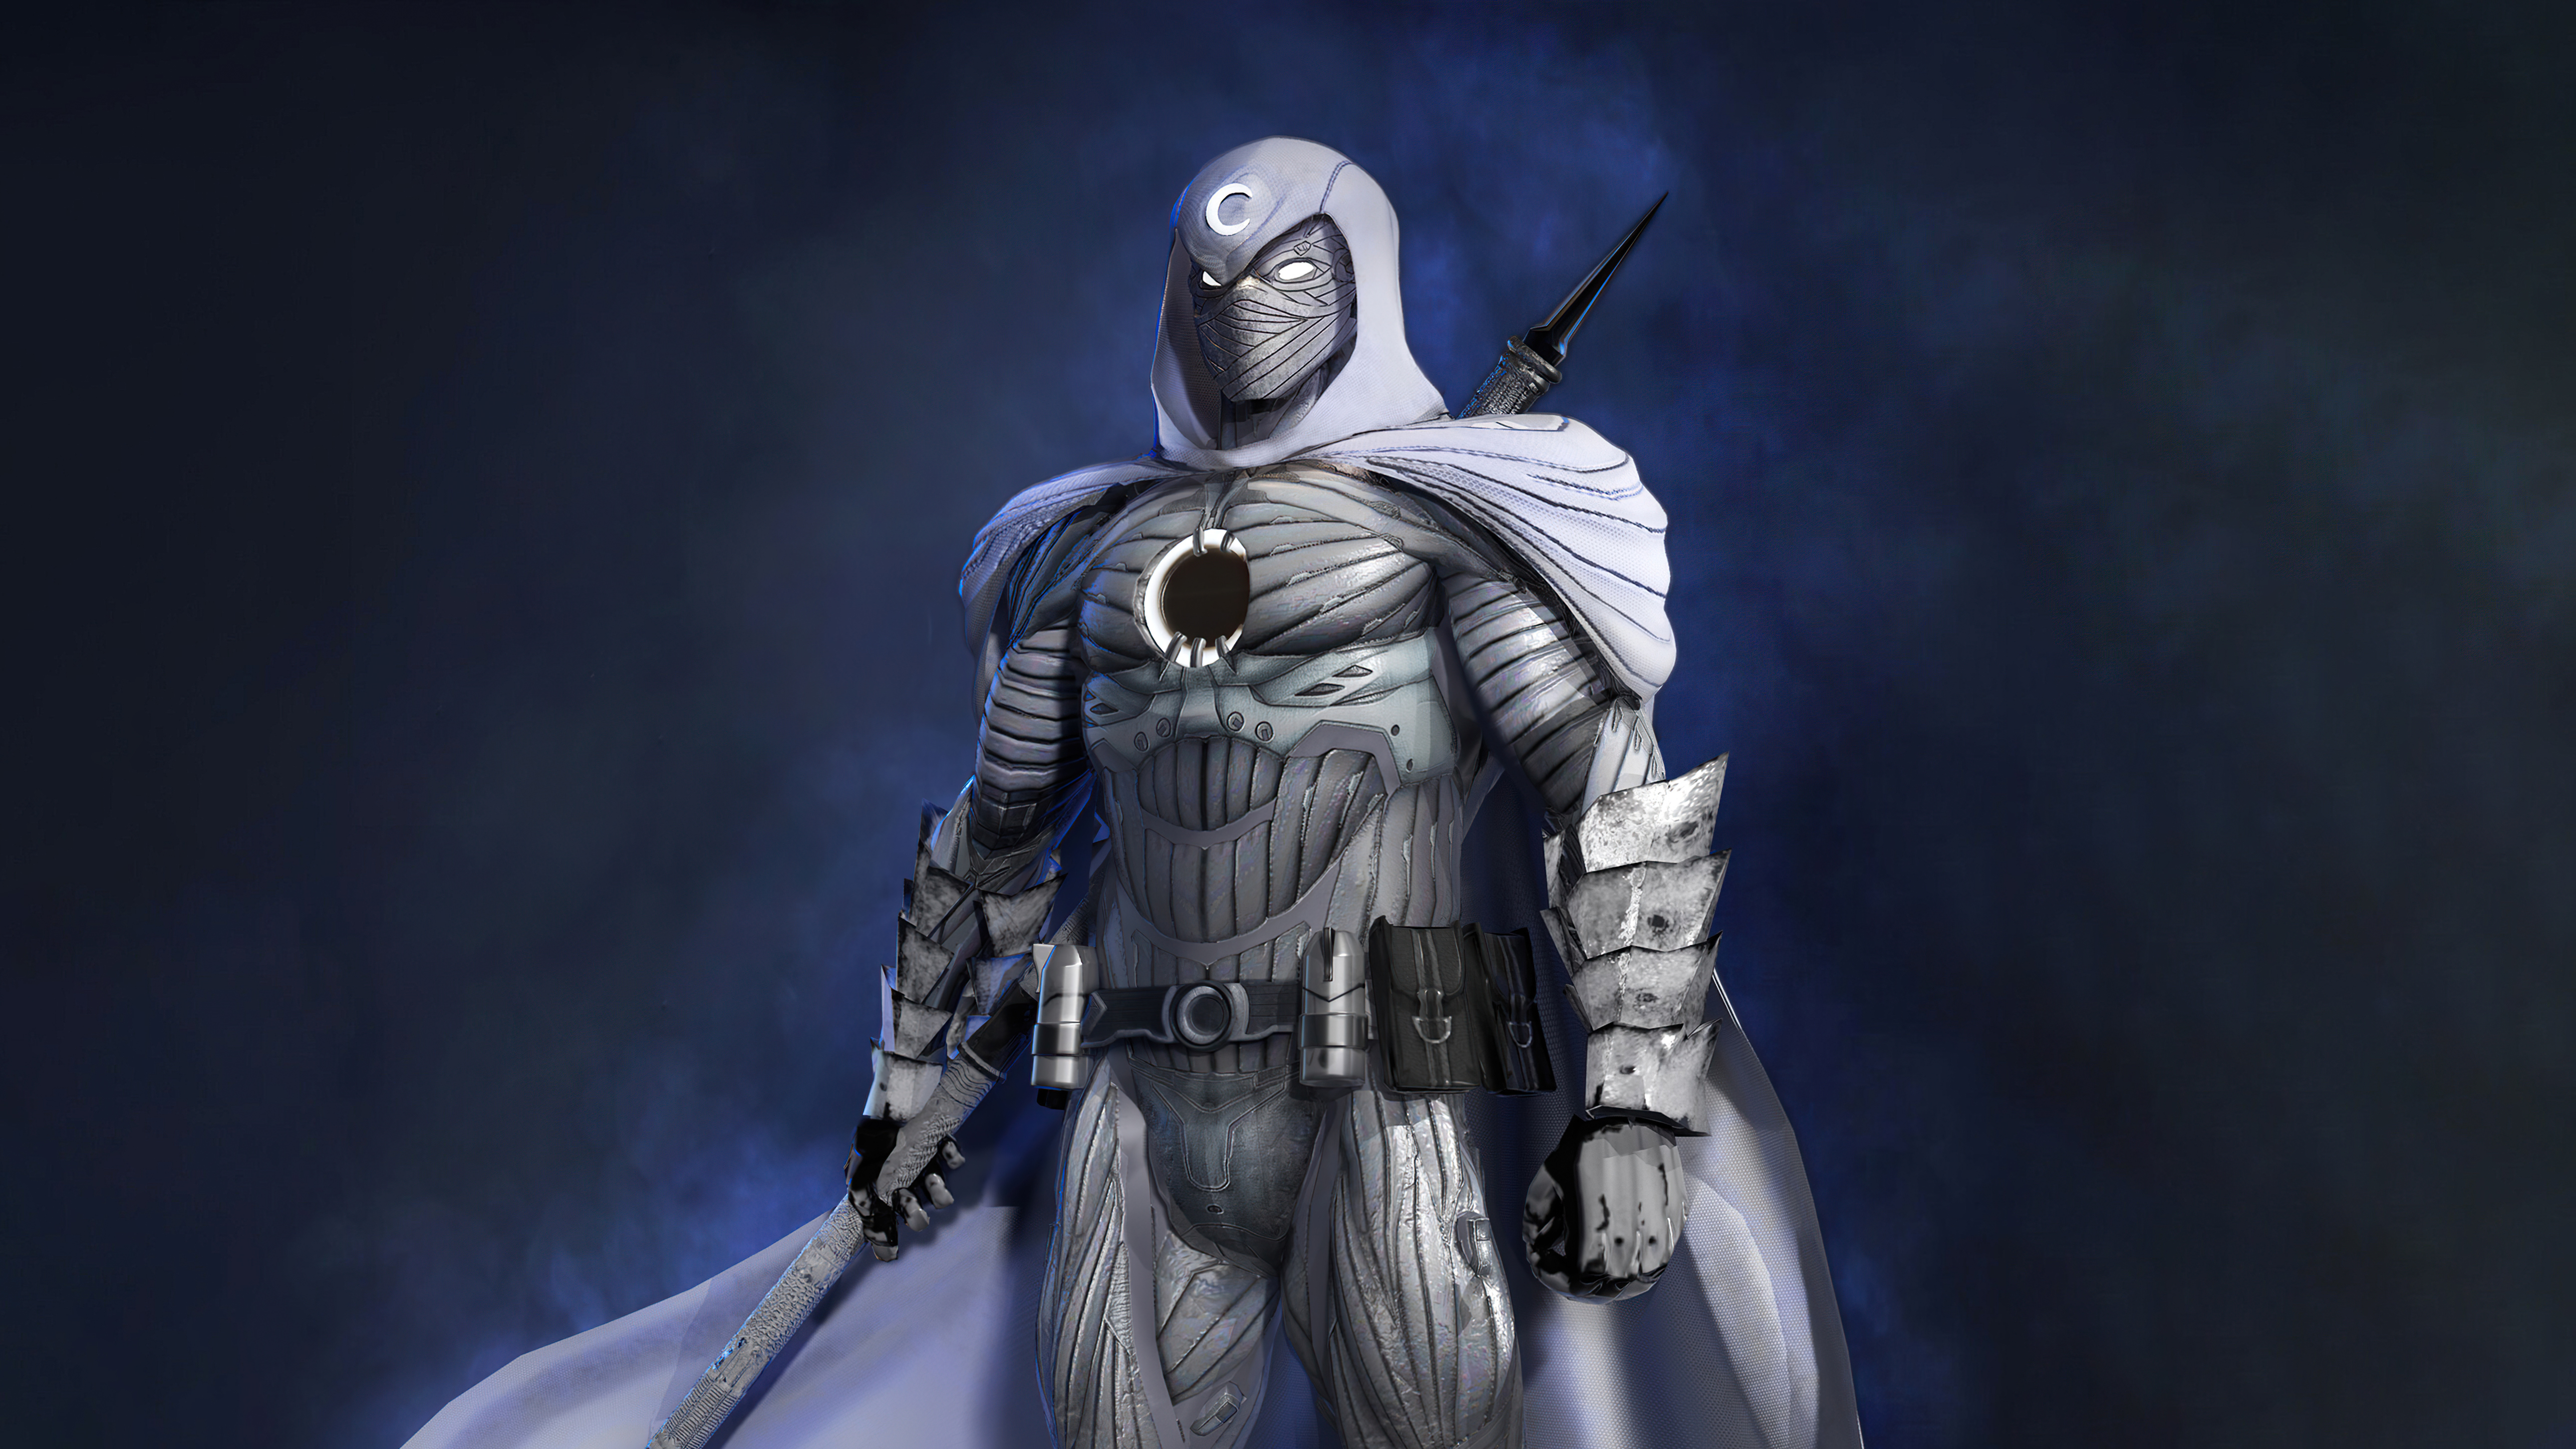 Marvel Moon Knight Art Wallpapers - Marvel Wallpapers for iPhone